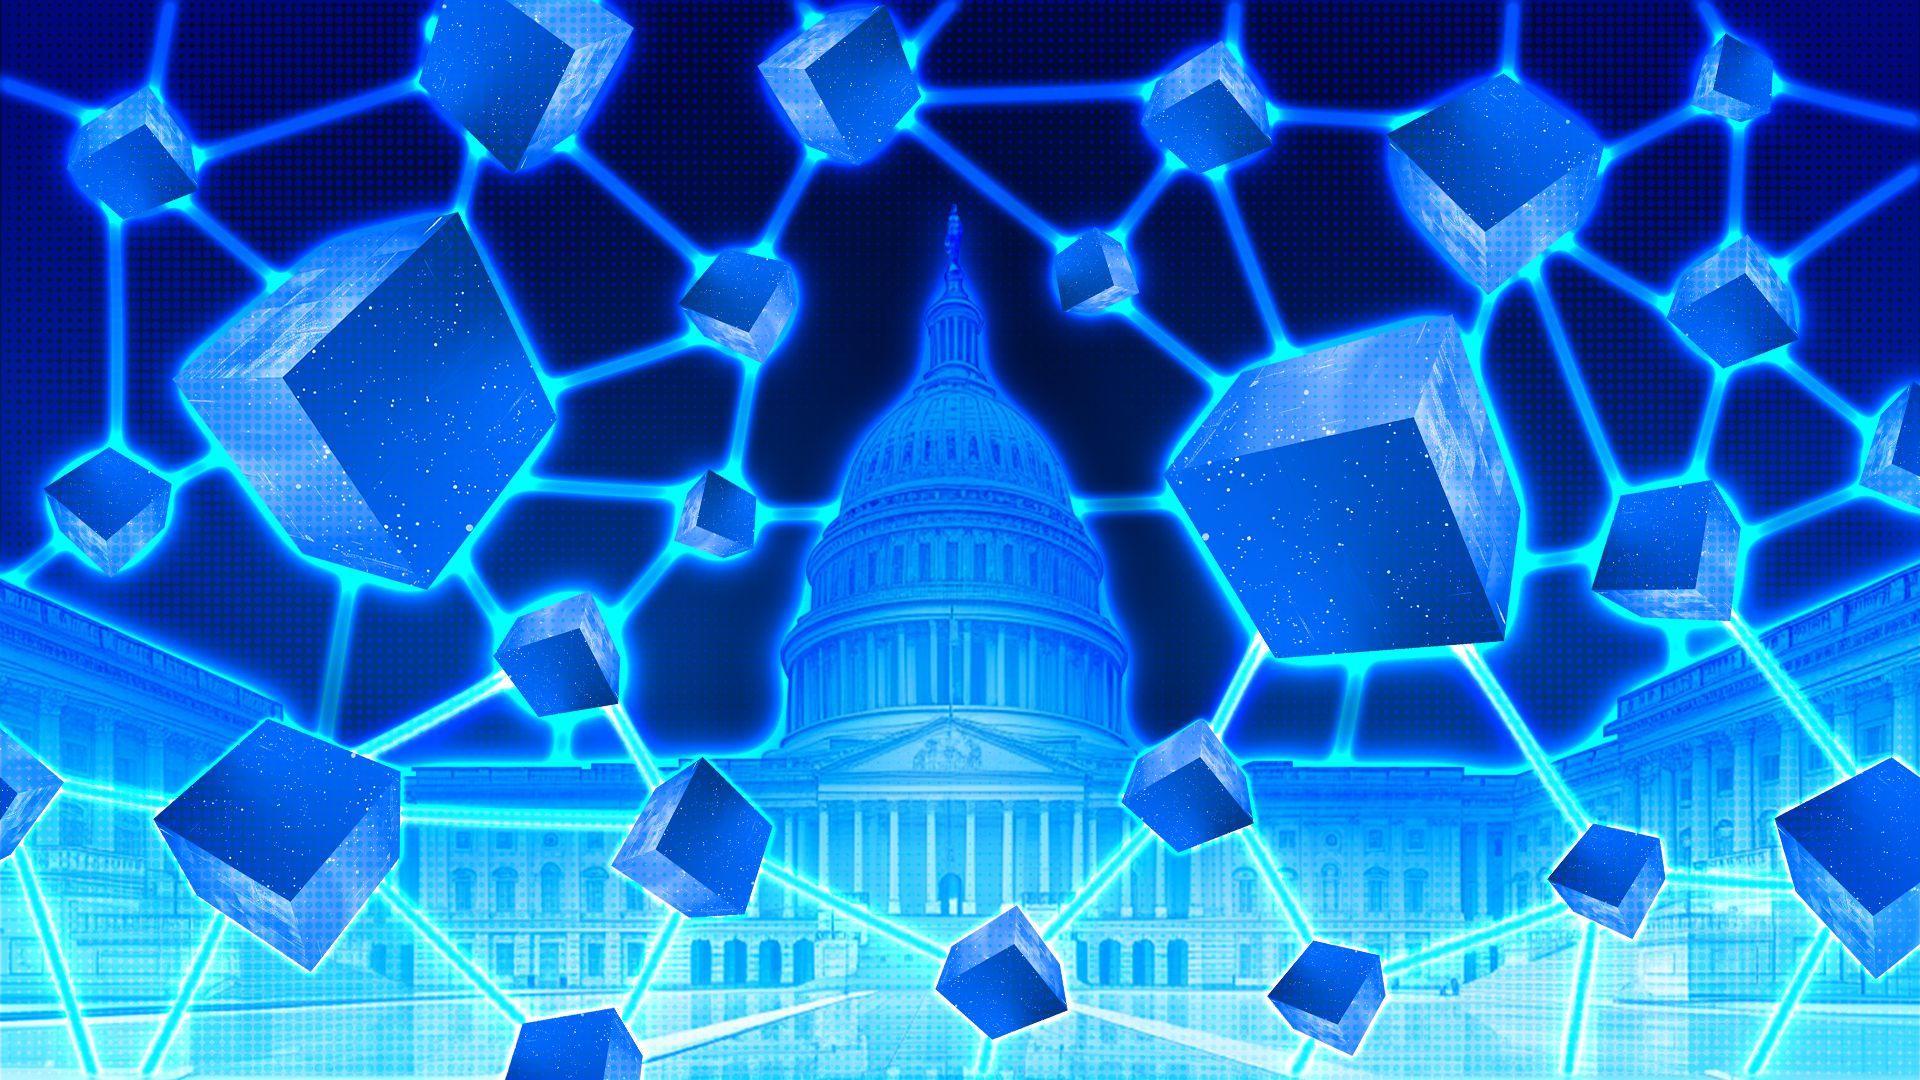 Applications of Blockchain in Government: Transparency and Accountability